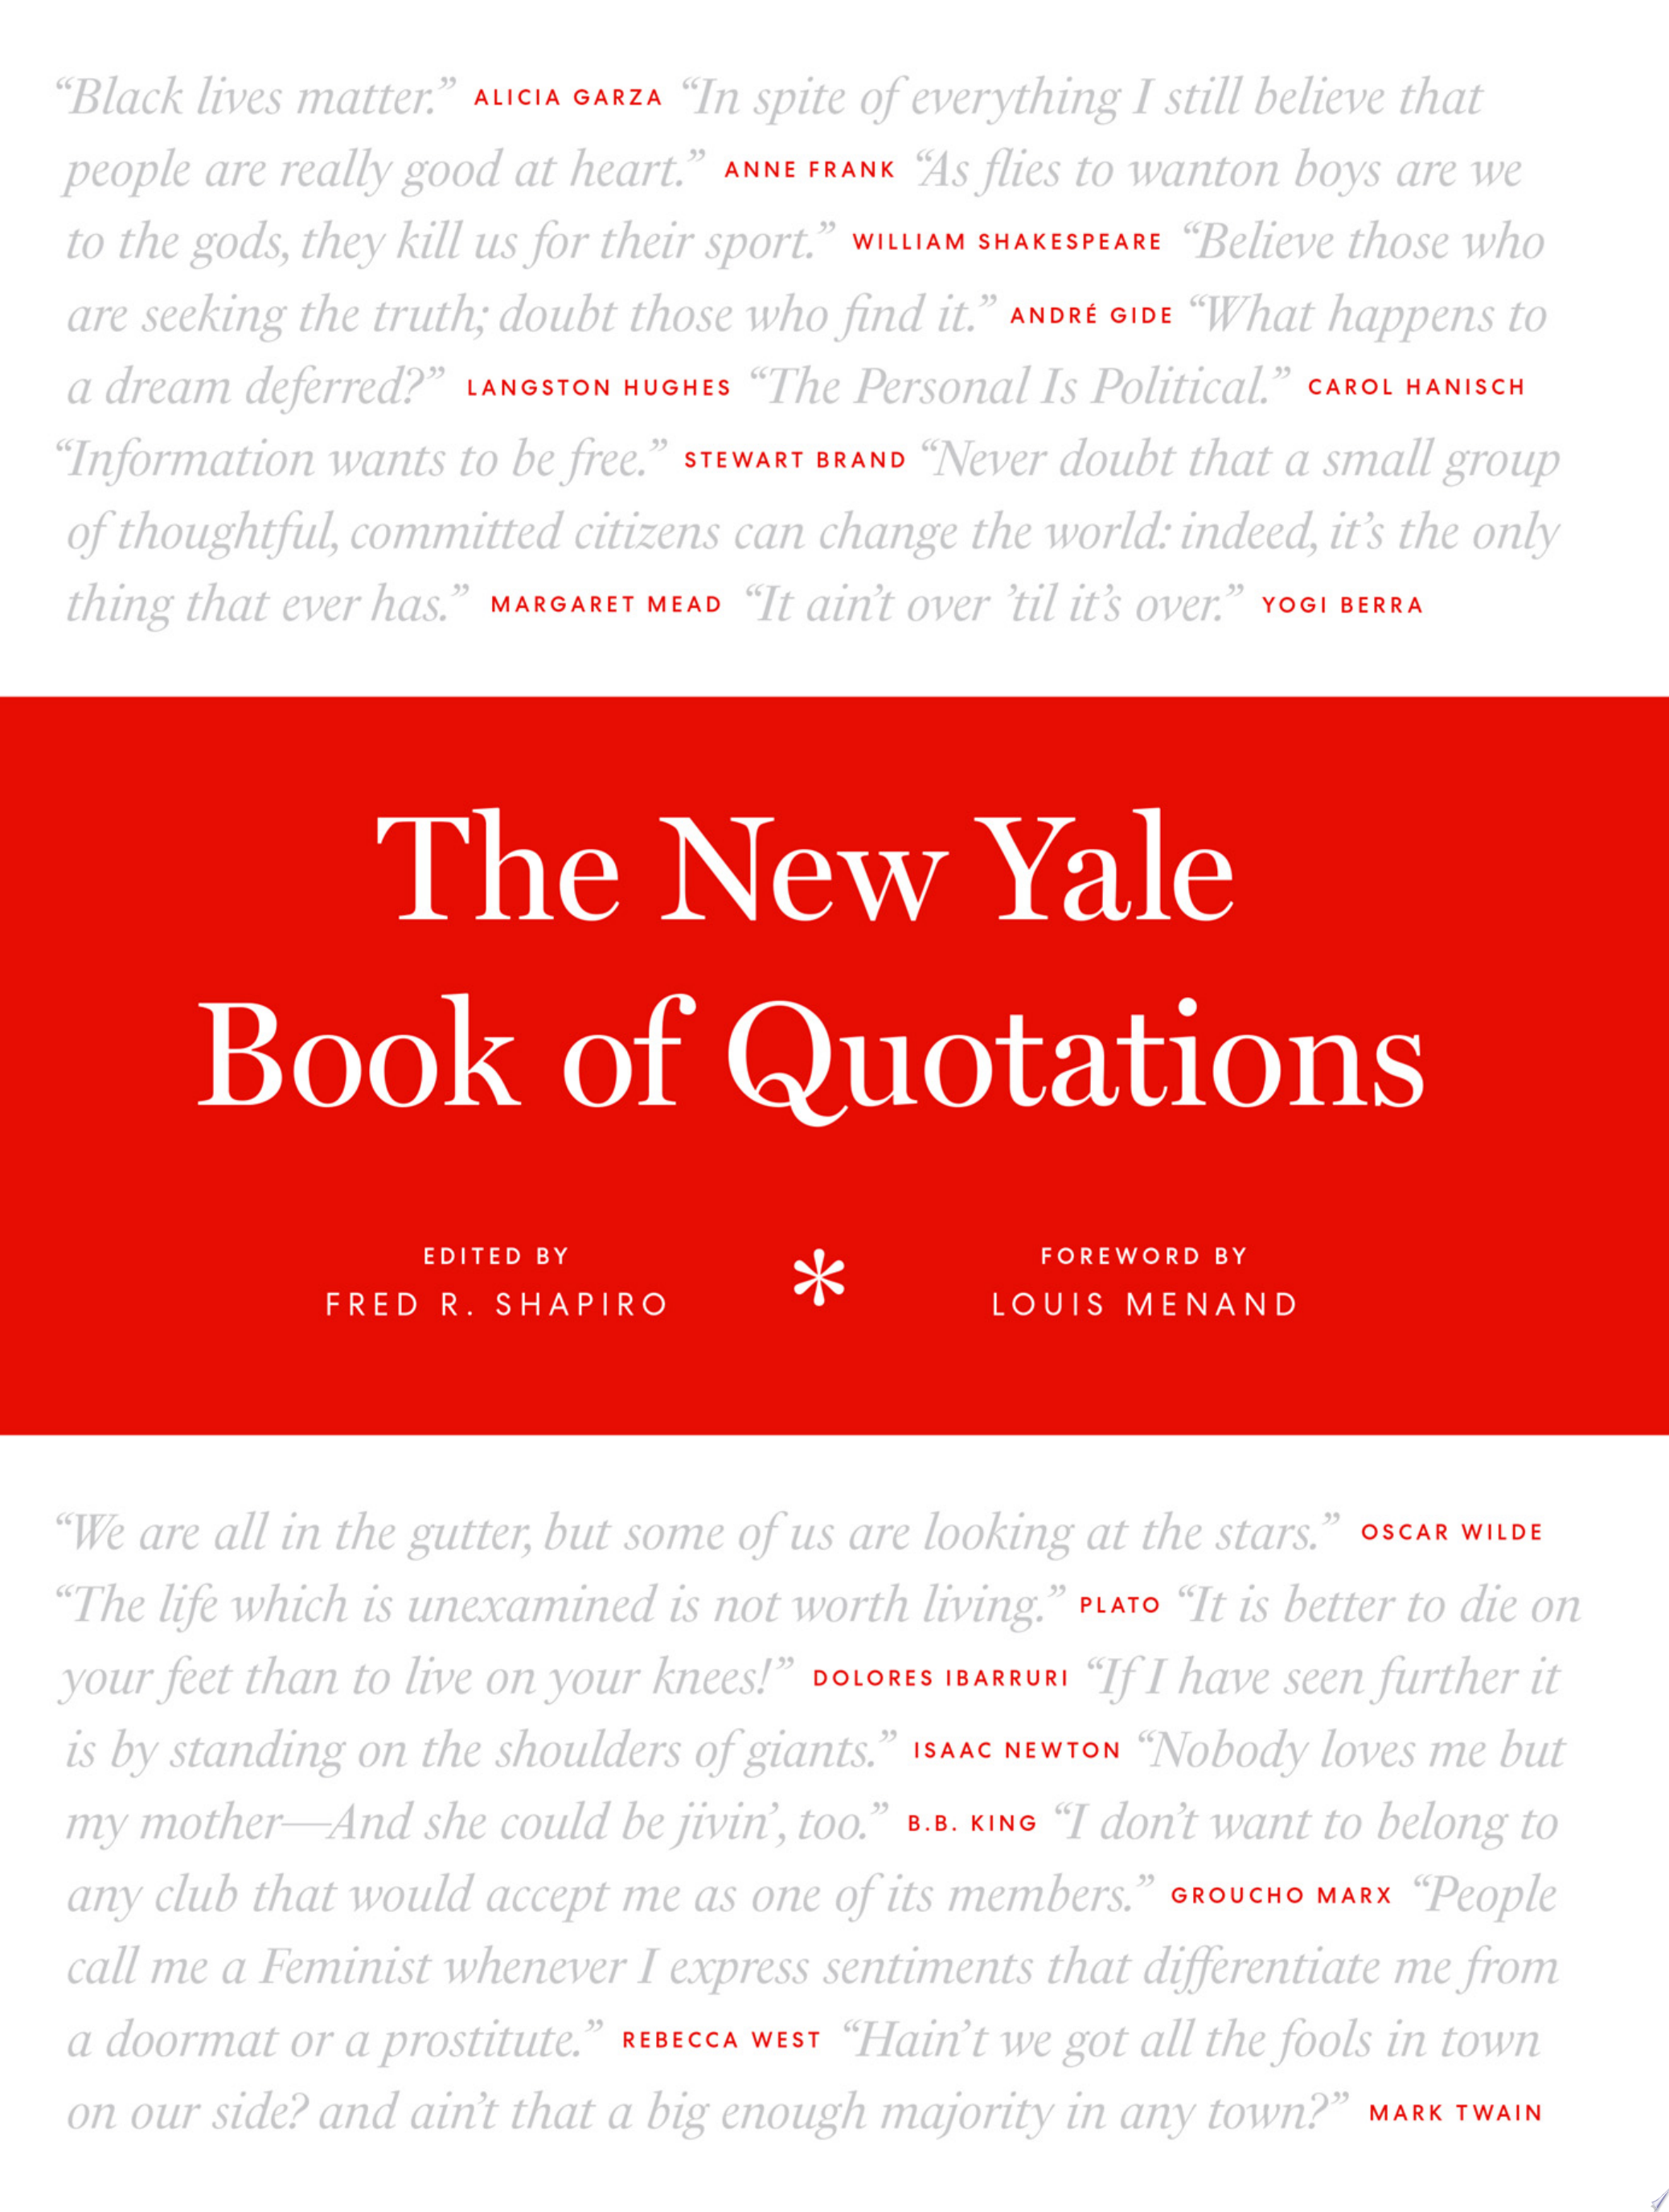 Image for "The New Yale Book of Quotations"